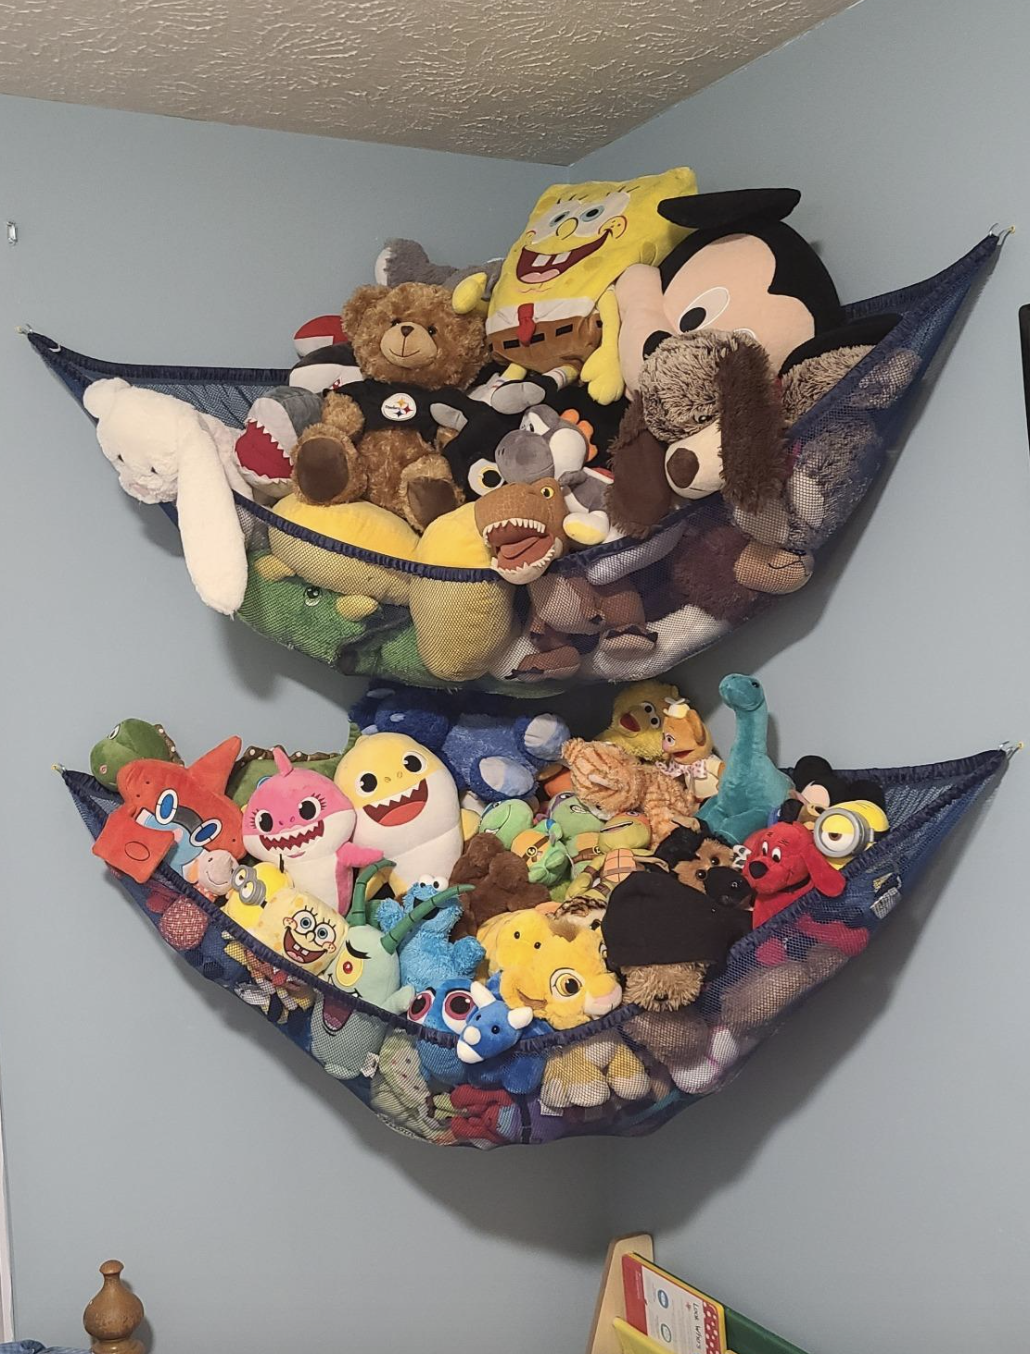 A customer review photo of the hammocks holding hundreds of stuffed animals